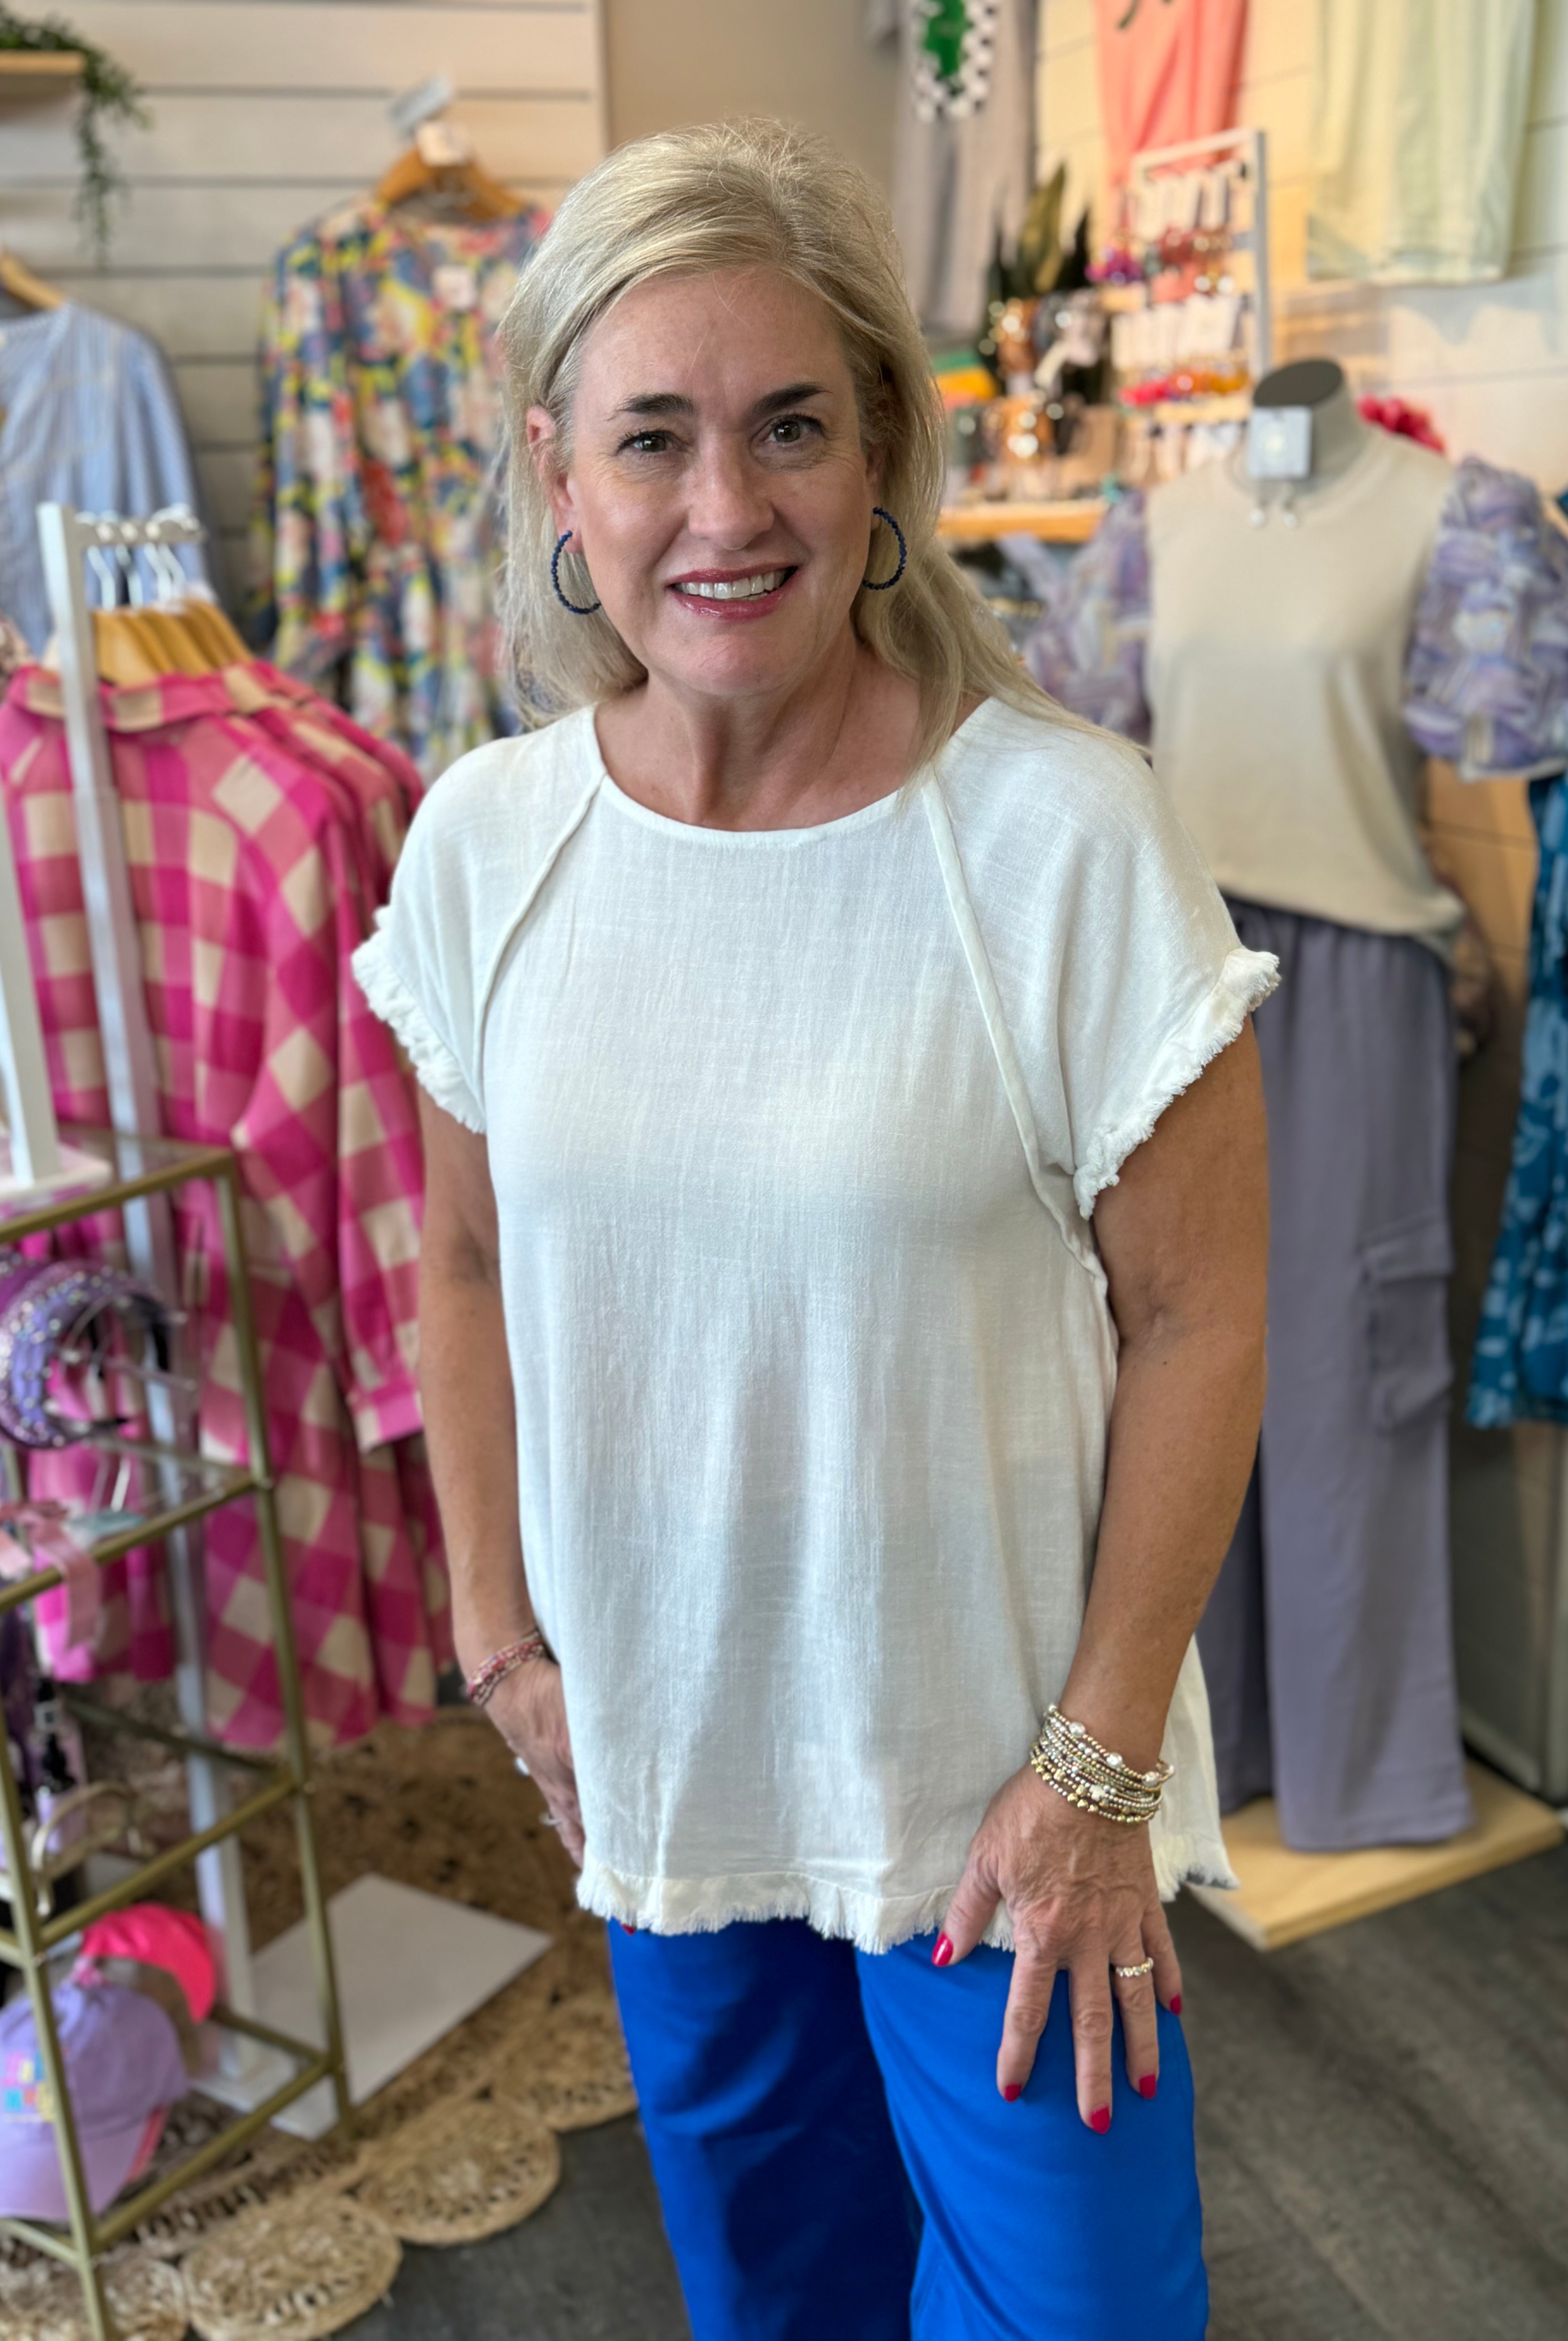 Take a Break Short Sleeve Top-100 Short Sleeve Tops-The Lovely Closet-The Lovely Closet, Women's Fashion Boutique in Alexandria, KY